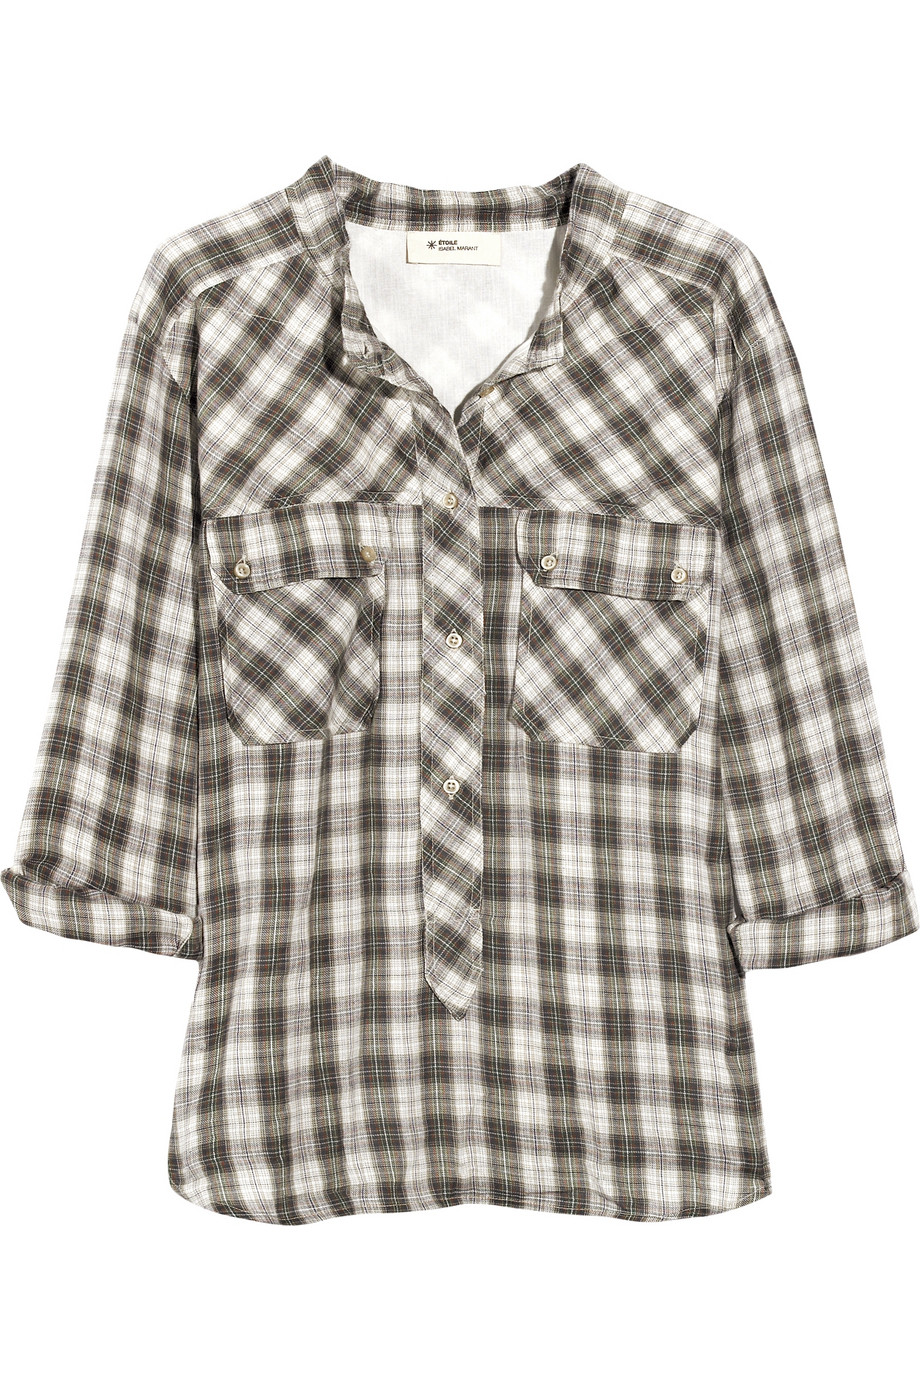 Etoile Isabel Marant Cotton-voile Plaid Shirt in Brown | Lyst